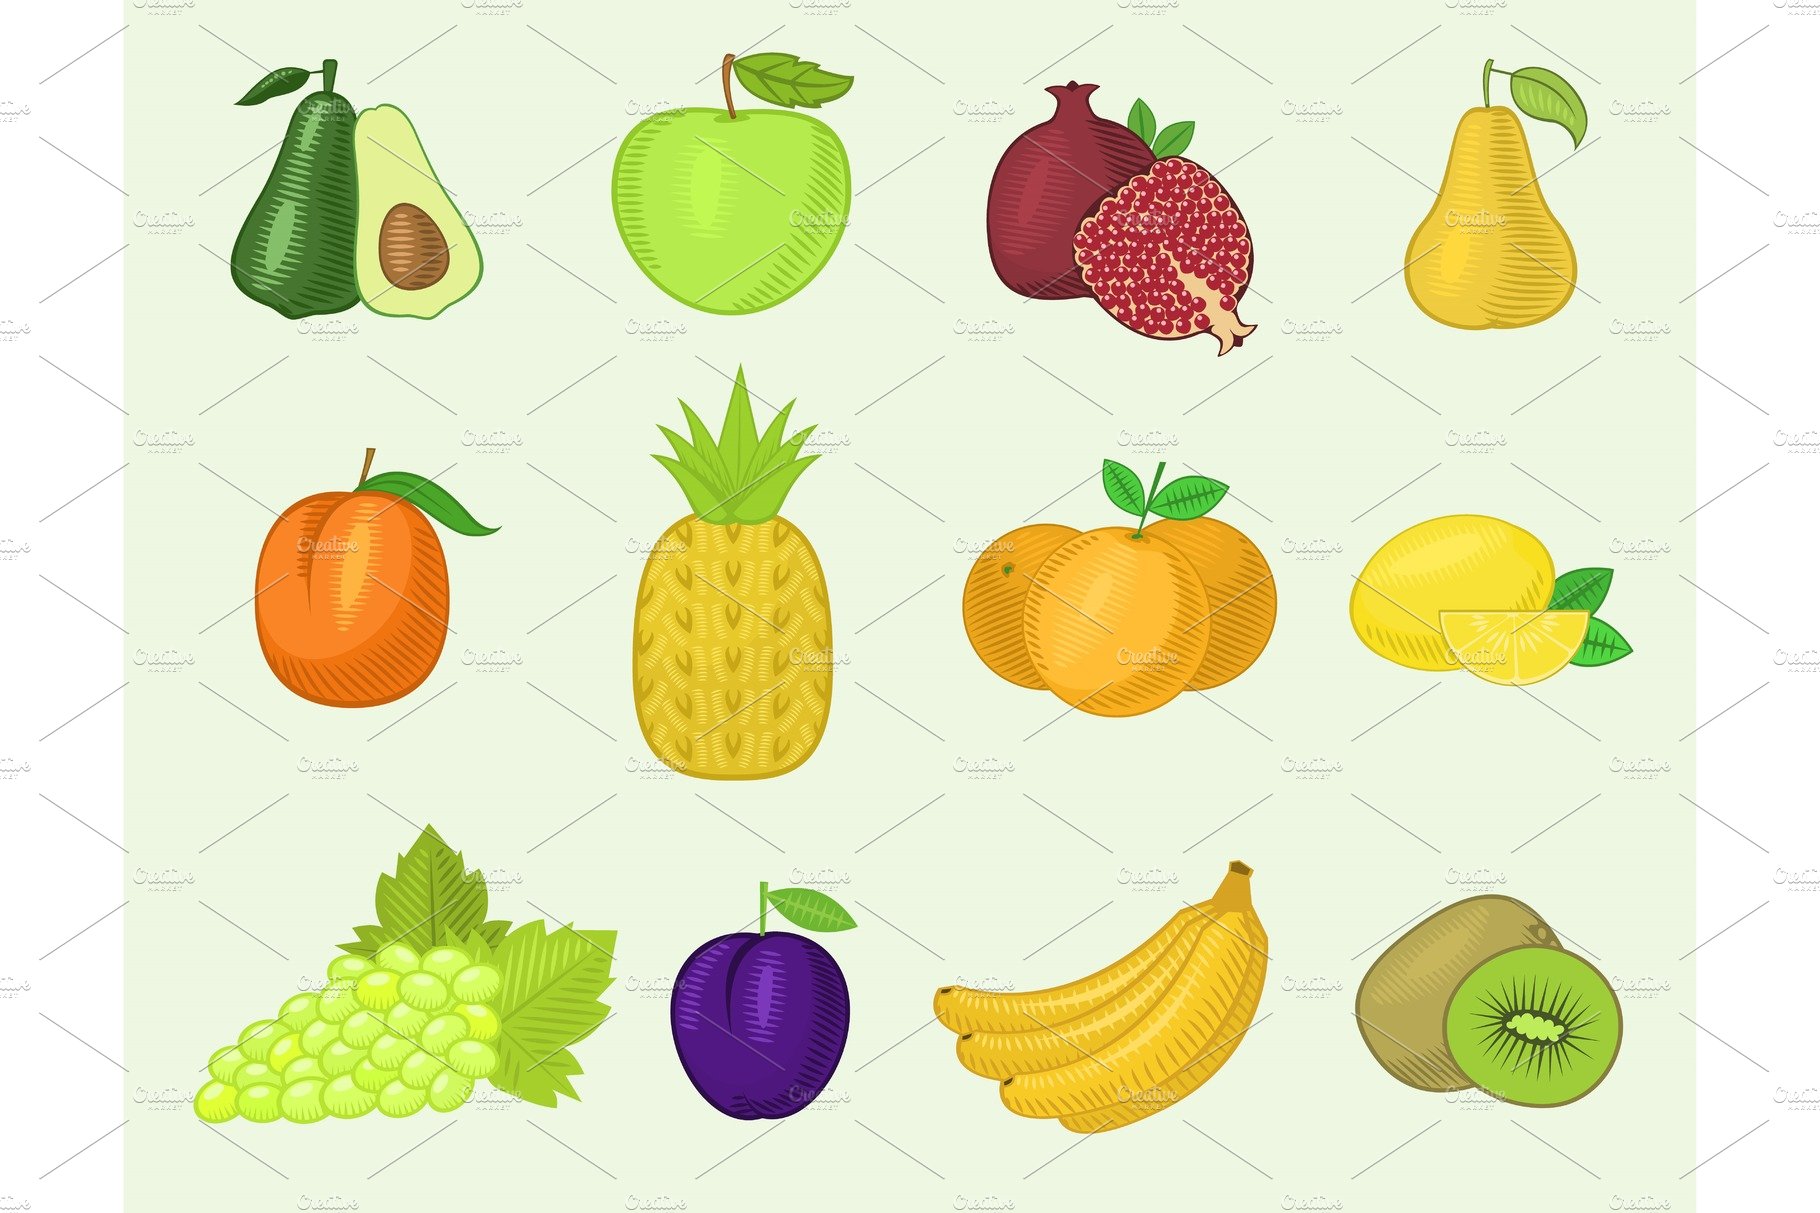 Fruits vegetables vector healthy cover image.